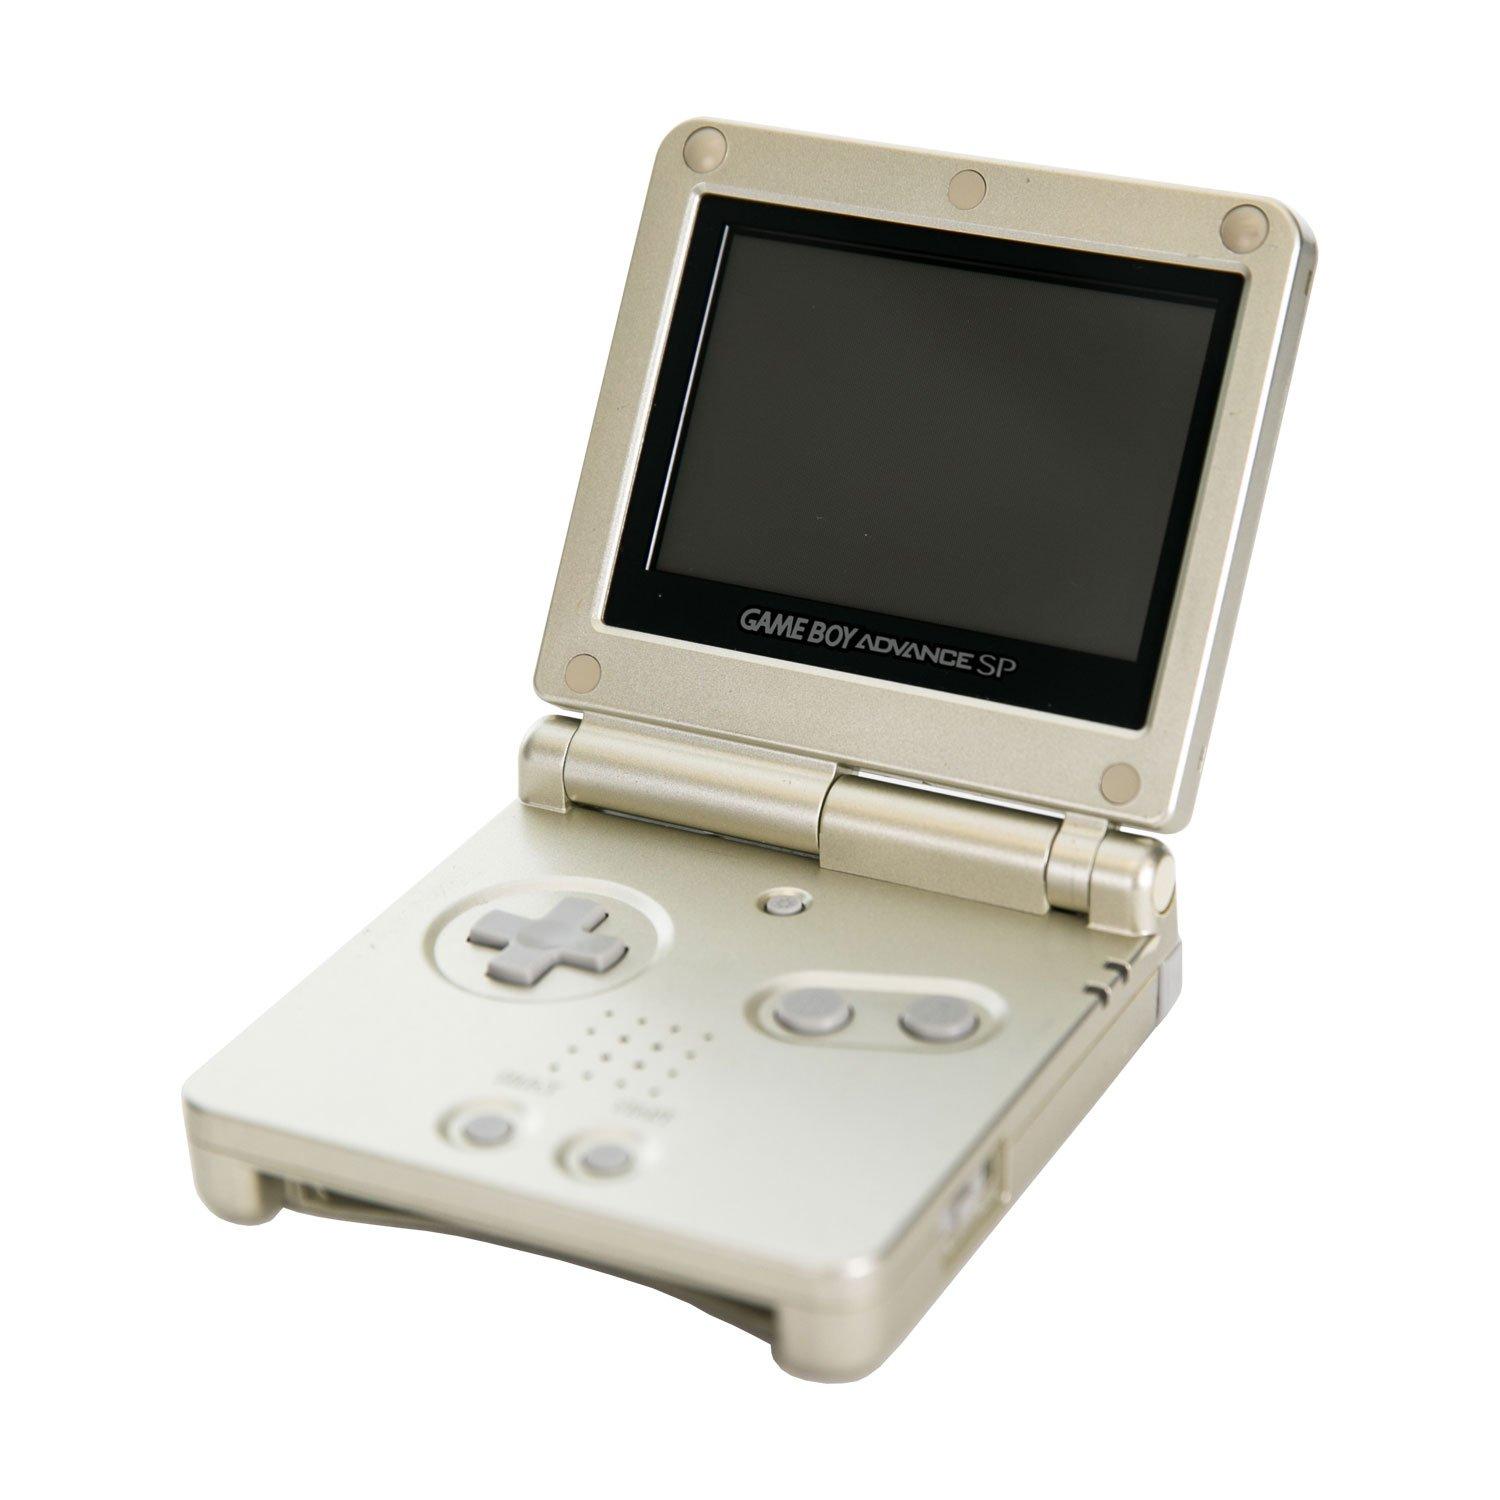 Nintendo Game Boy Advance SP with AC Gold | GameStop